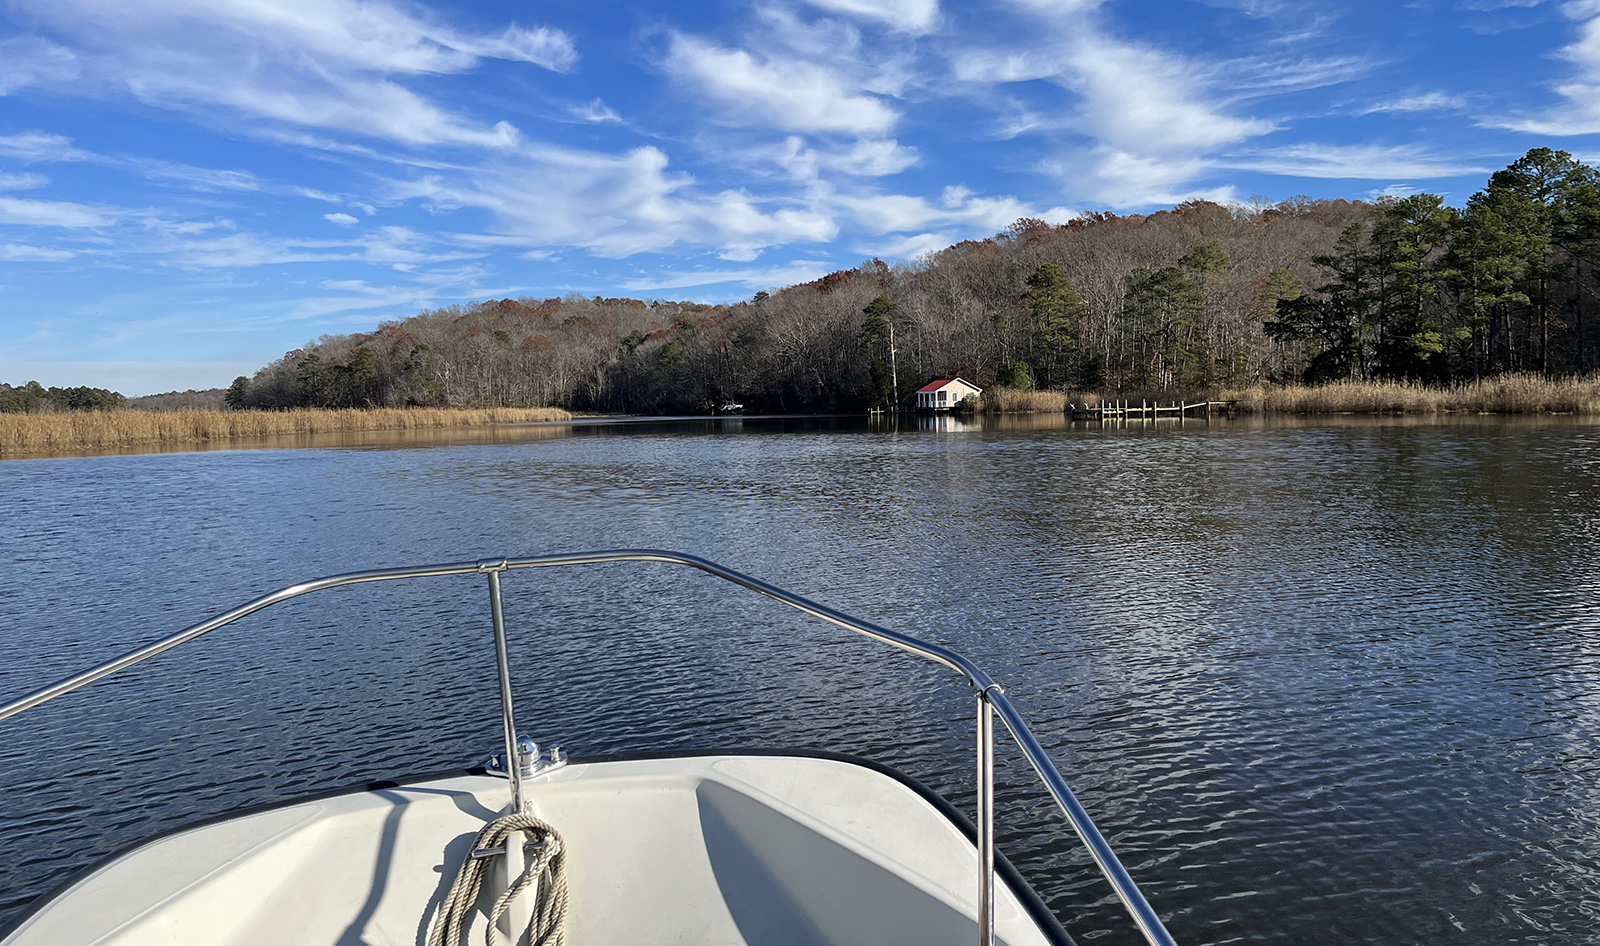 A photo taken from a boat, showing the boat's bow, a stretch of river, and a wooded bank.